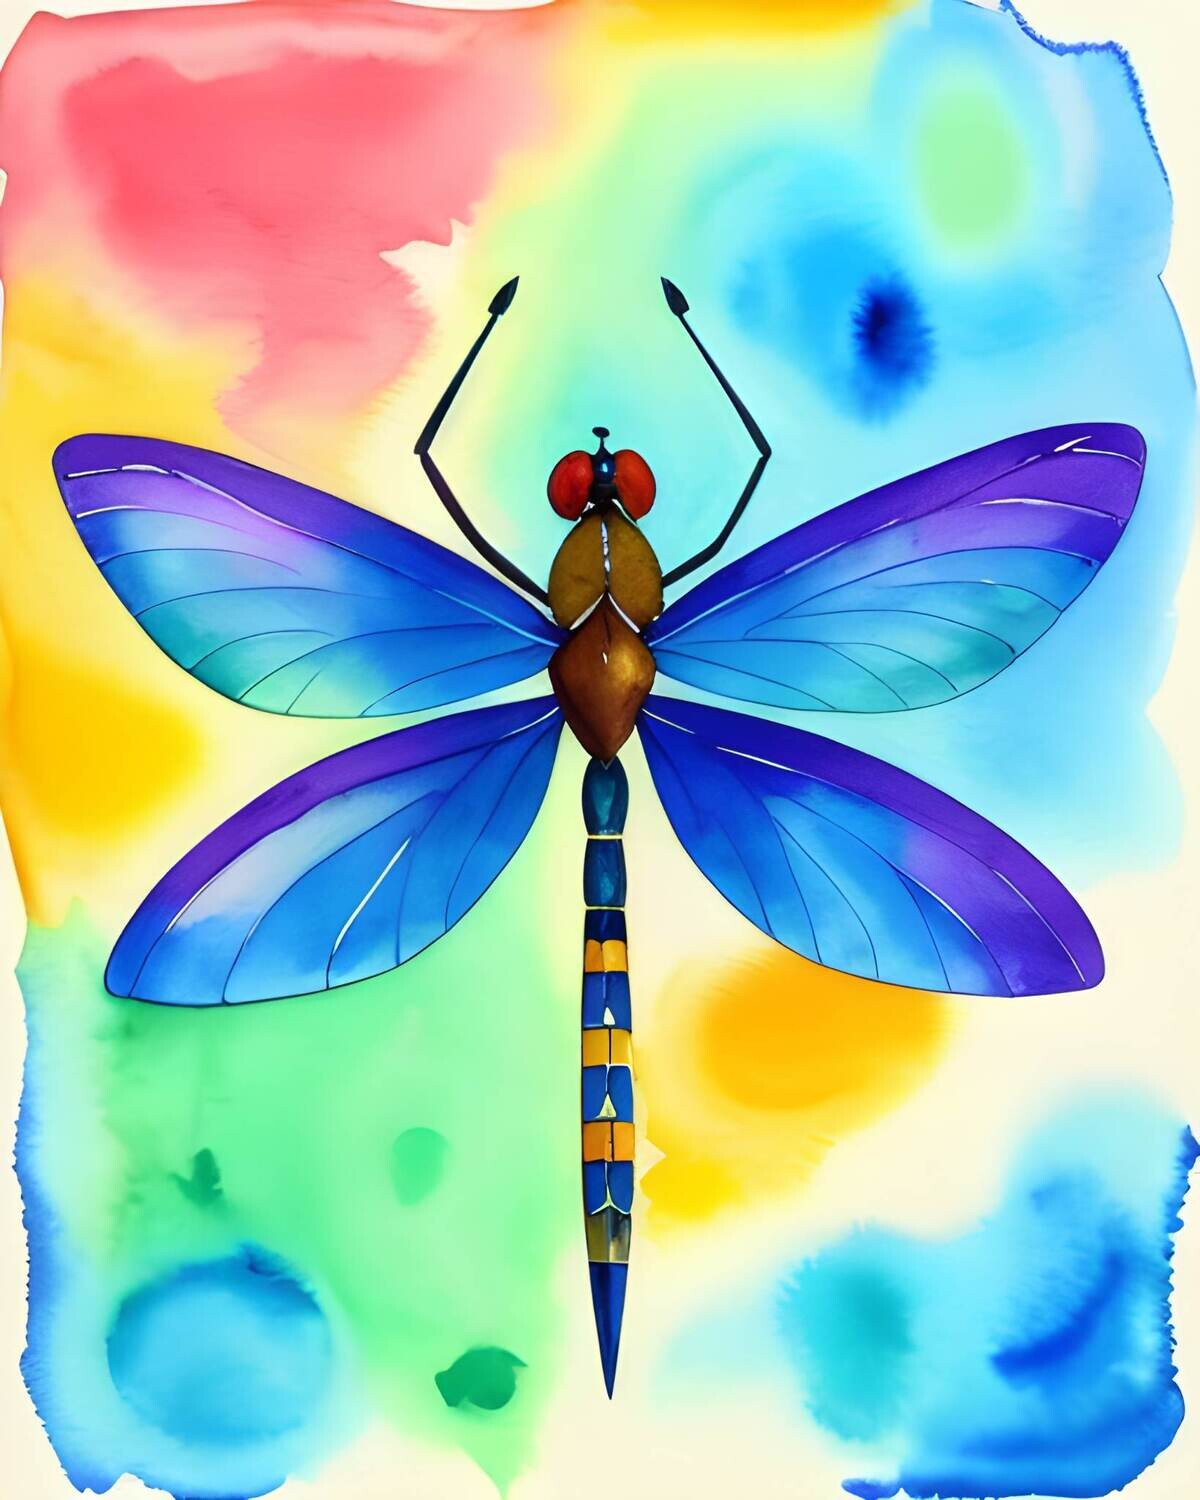 Dragonfly Watercolour 1 - 30 x 40cm Full Drill (Square) POURED GLUE - Diamond Painting Kit